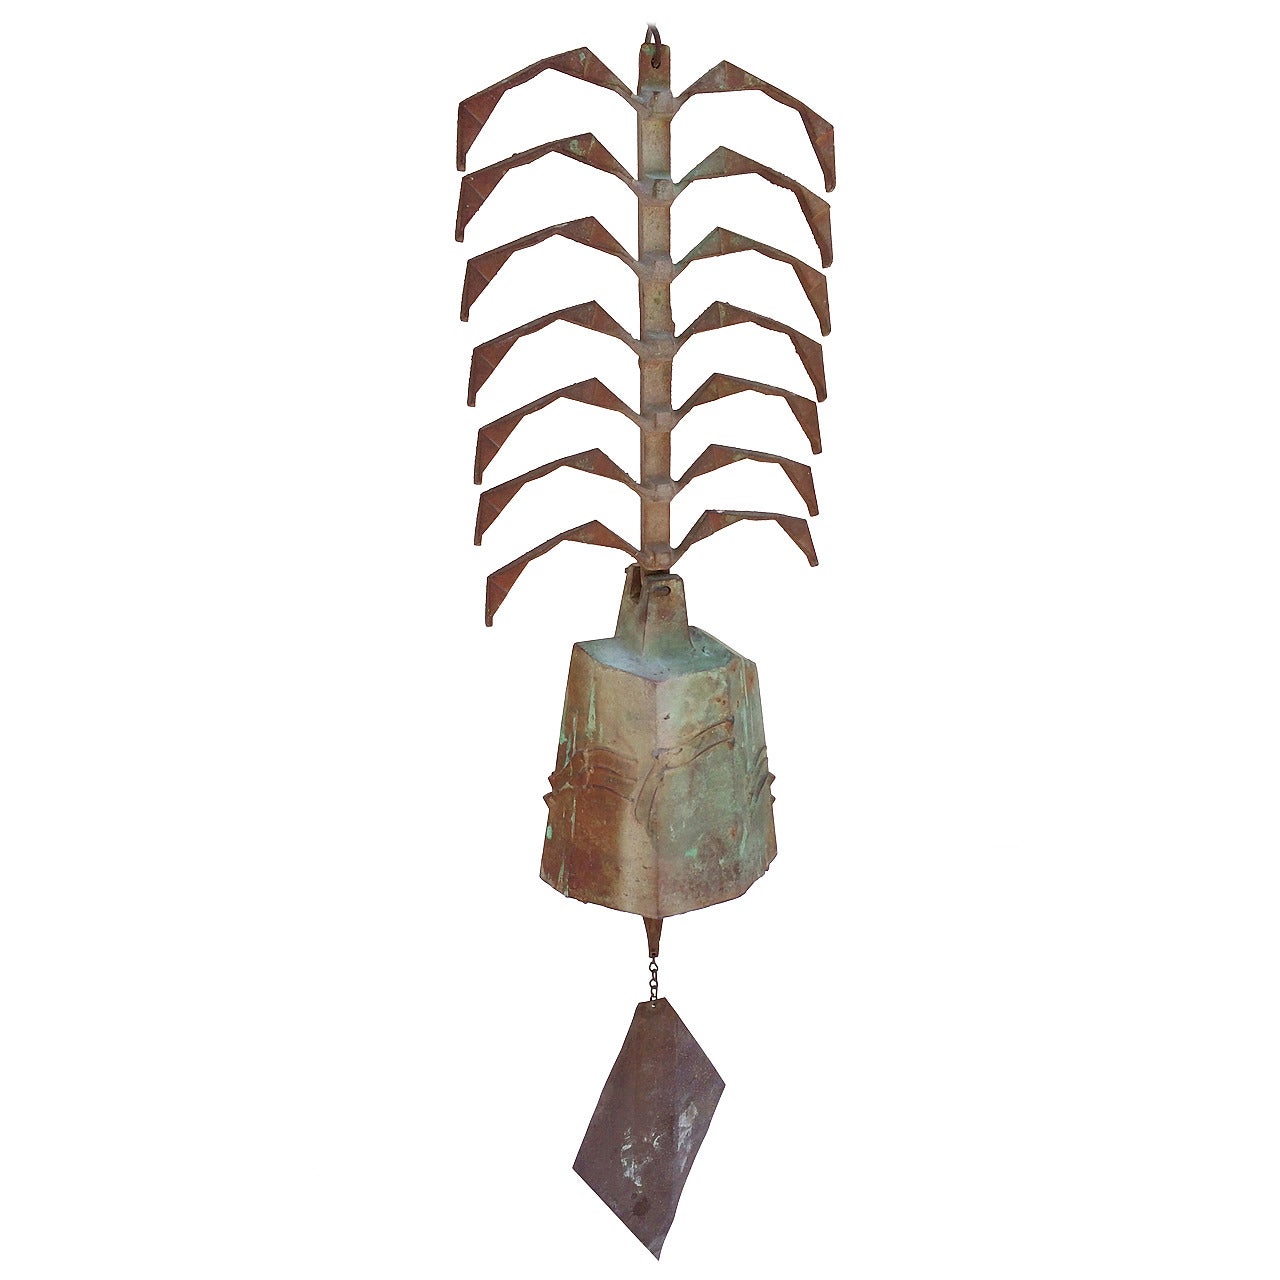 Large-Scale Sculptural Bronze Wind Bell Designed by Paolo Soleri